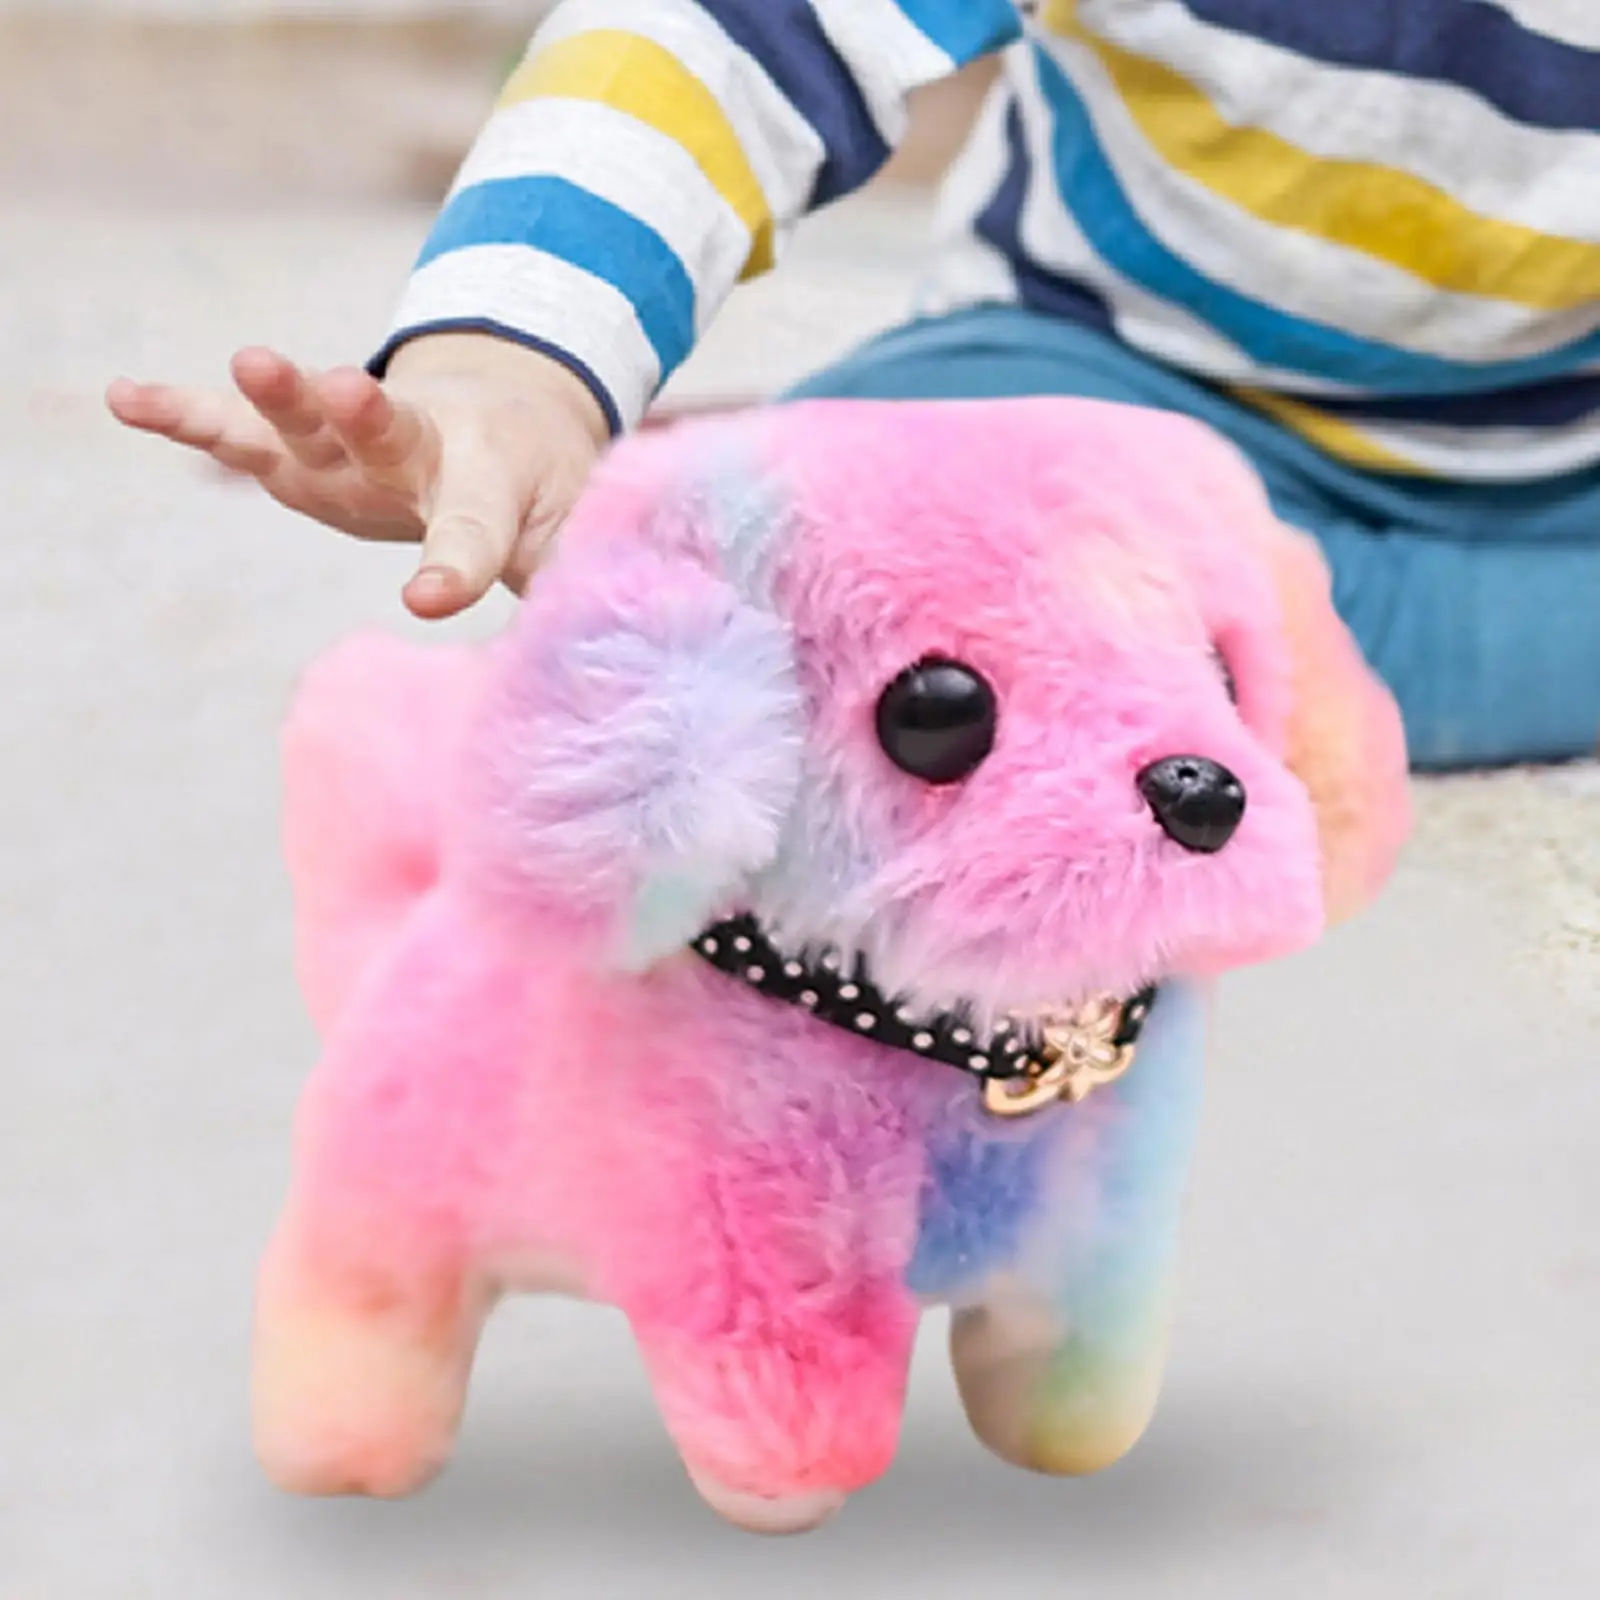 Electronic Pet Figures Adorable Novelty Stuffed Animals Plush Toy Doll for New Year Gifts Xmas Present Party Favor Children Toys